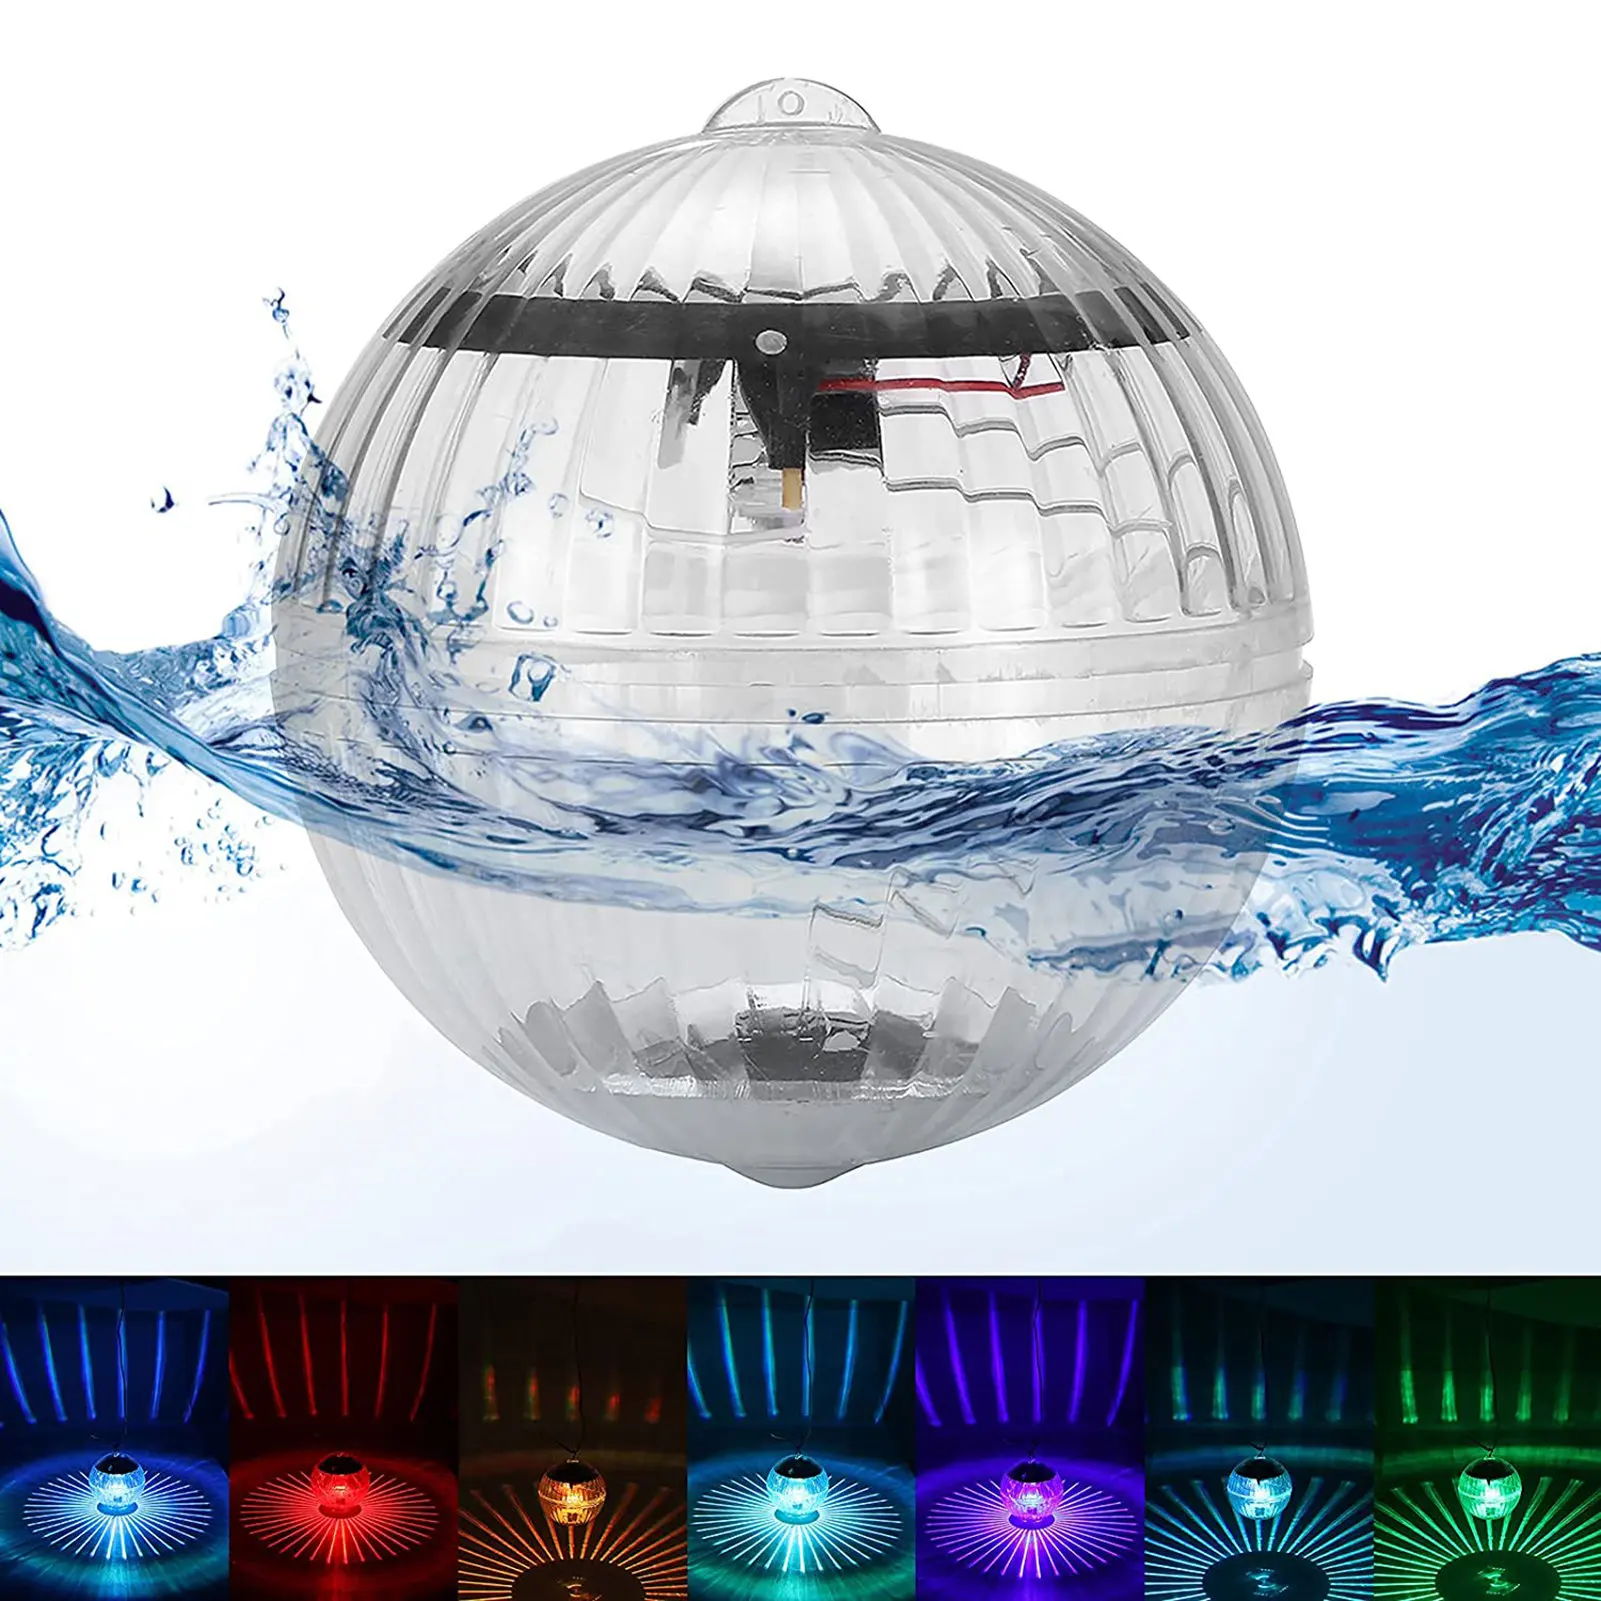 

Underwater Ball Lamp Outdoor Floating Solar Powered Color Changing Night Light Swimming Pool Party For Yard Pond Garden Lamp NEW